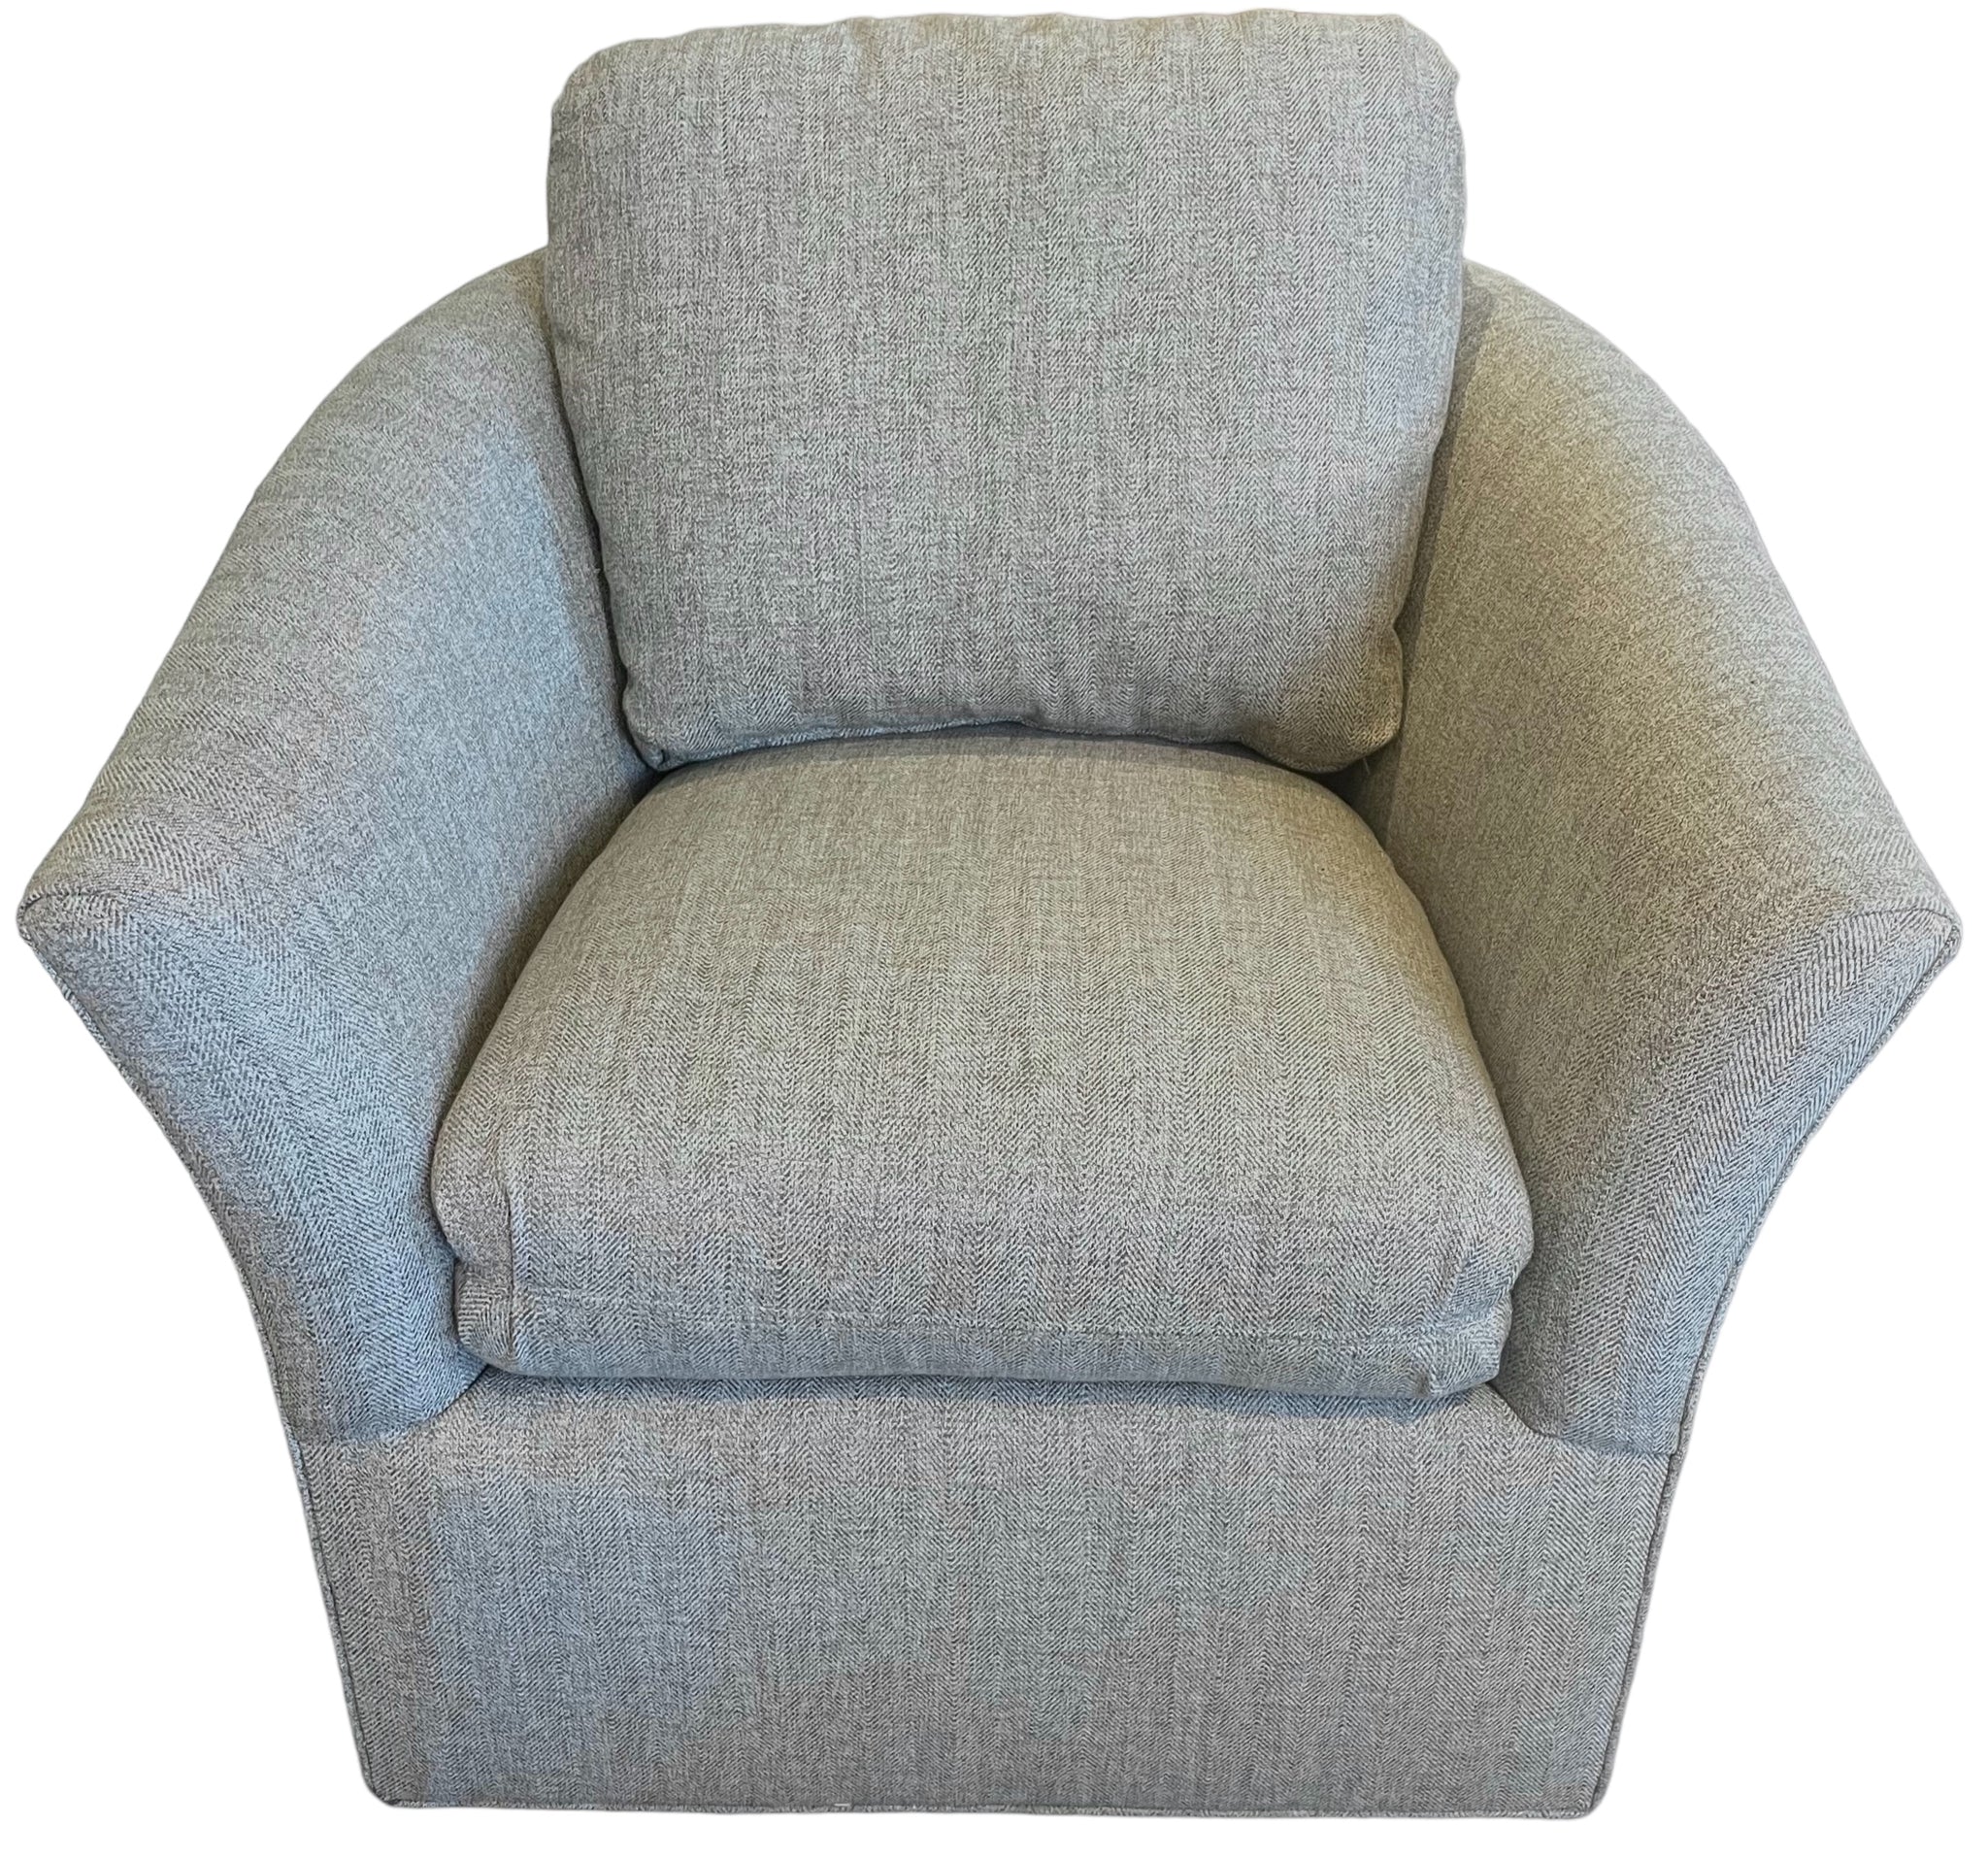 NEW Century Mill Valley Swivel Chair in Grey Tweed